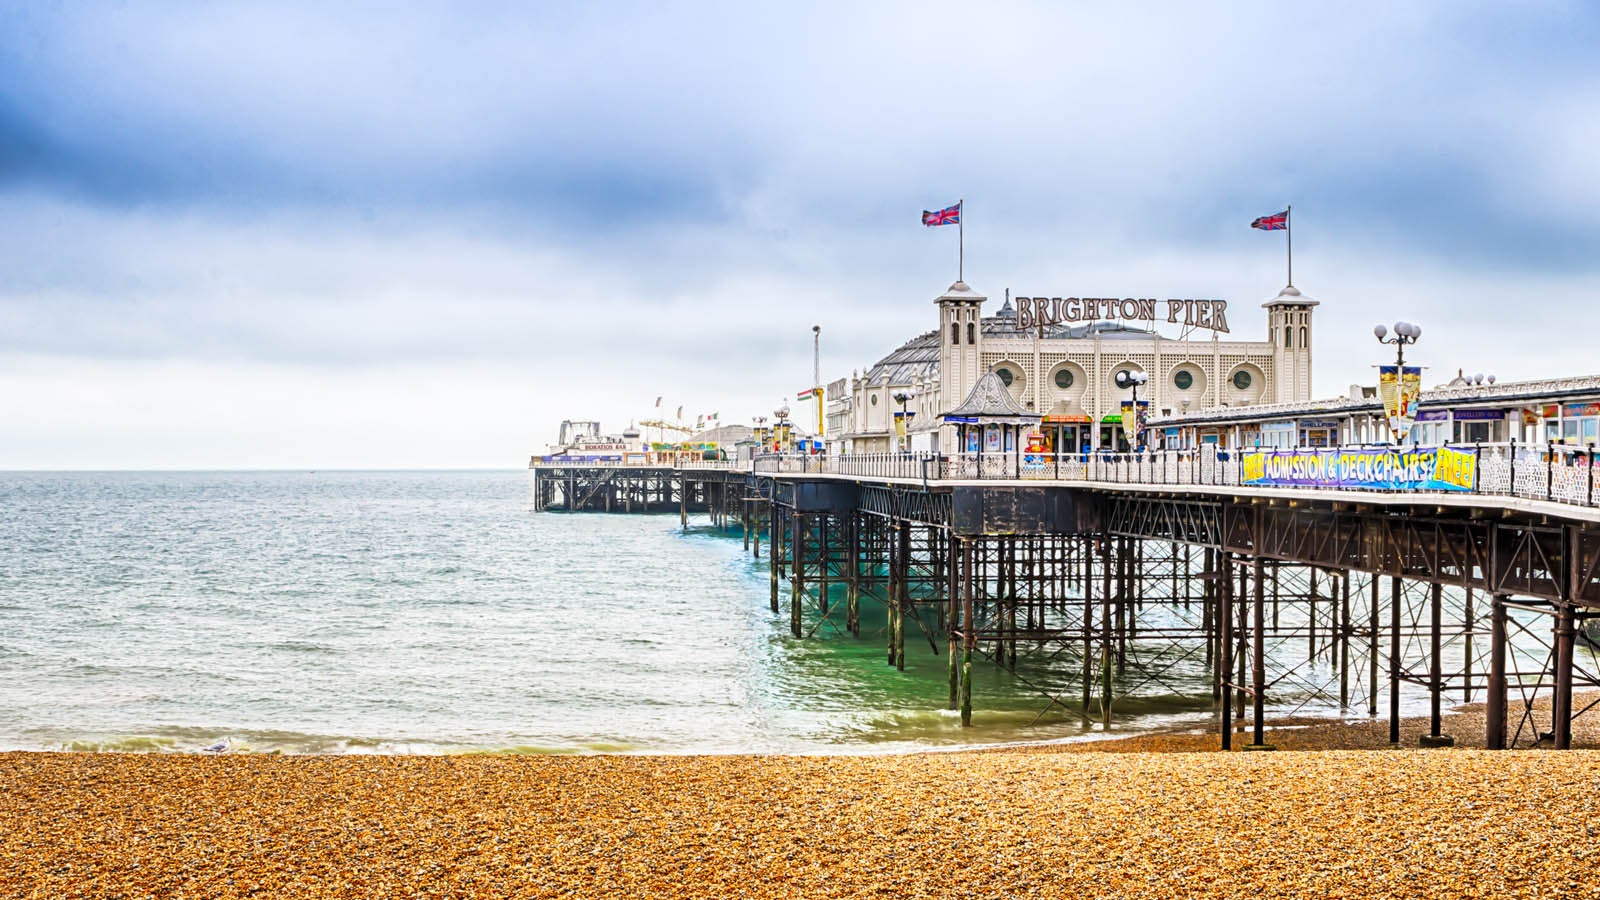 A photograph of Brighton Pier taken from the beach.